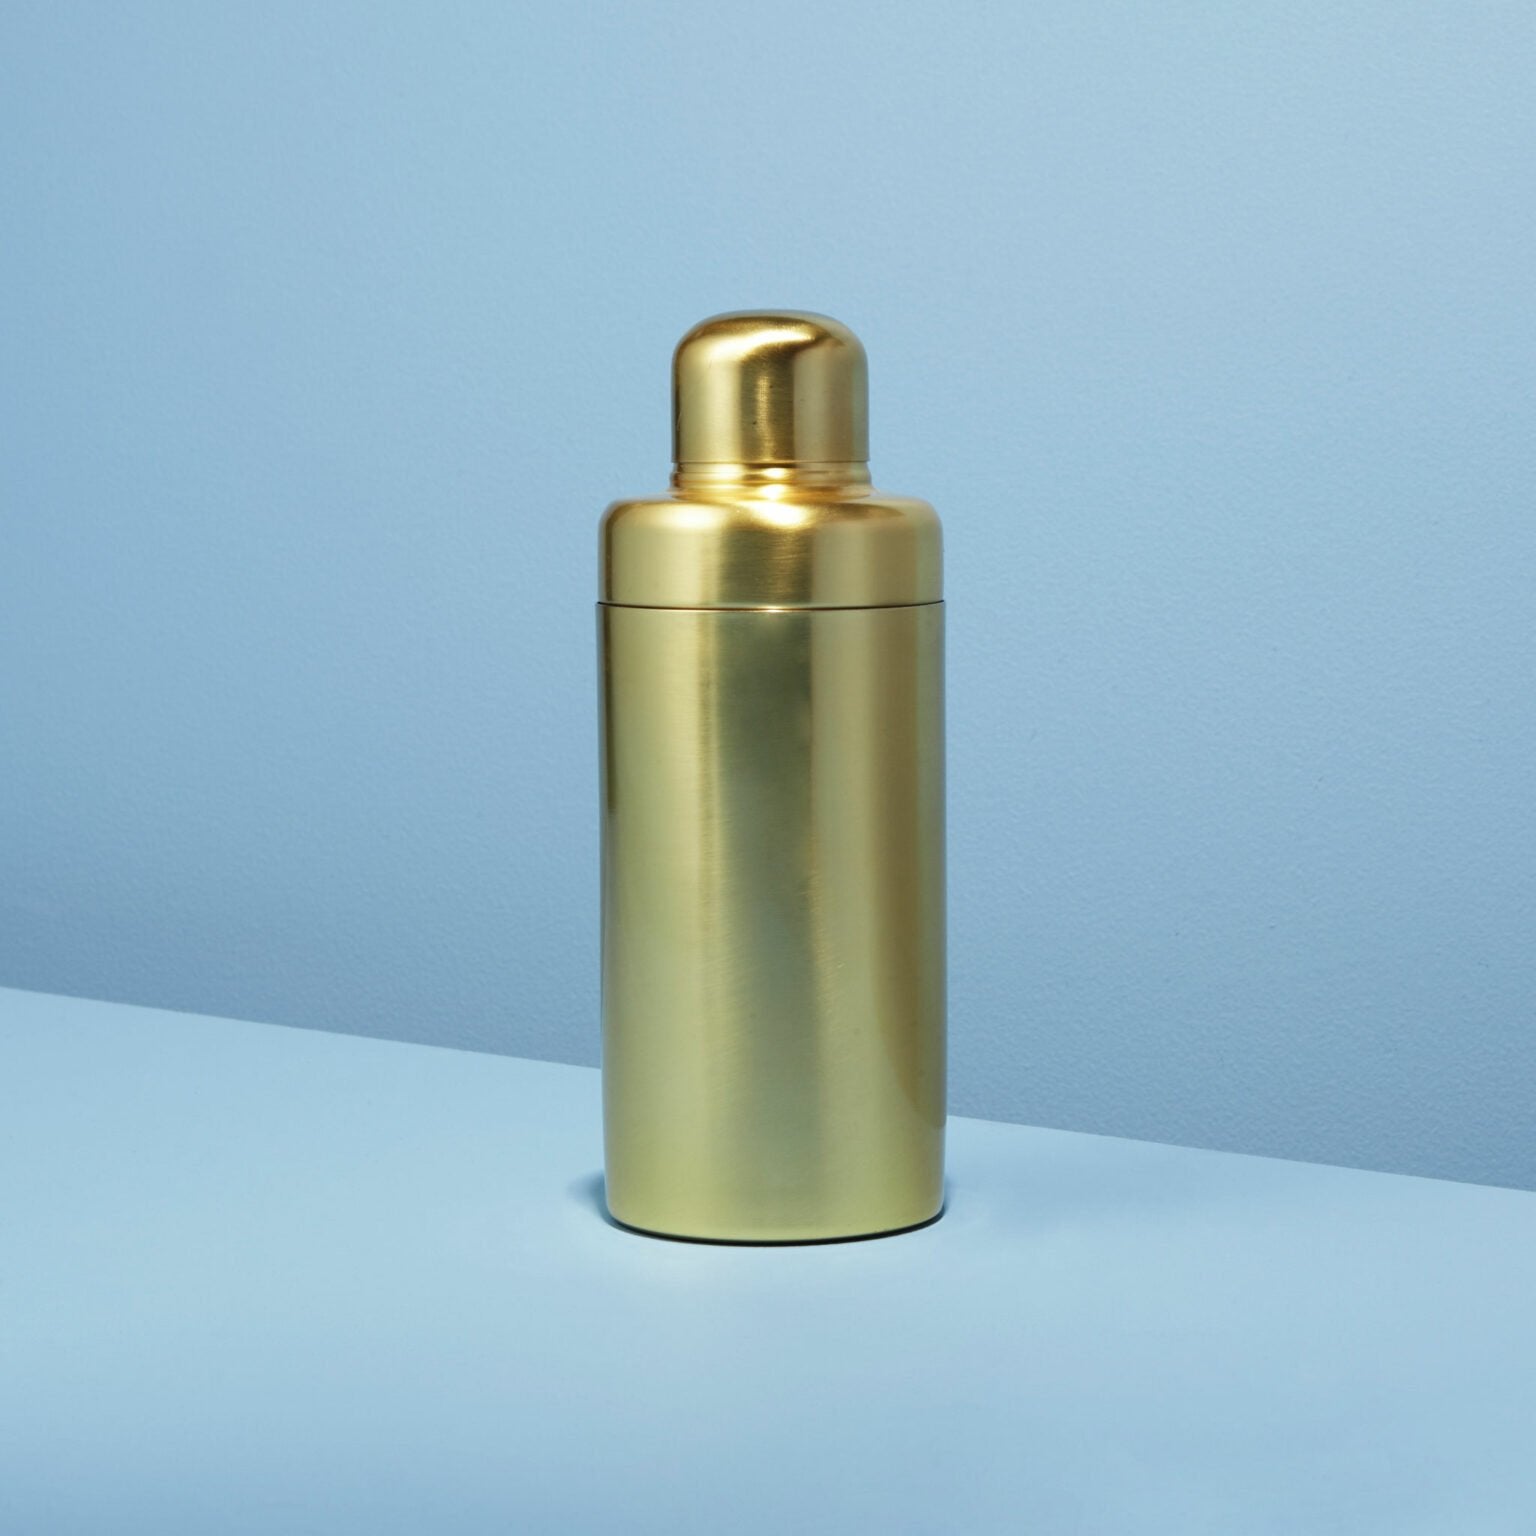 Be Home_Matte Gold Cocktail Shaker_90-50_Gold_14062022